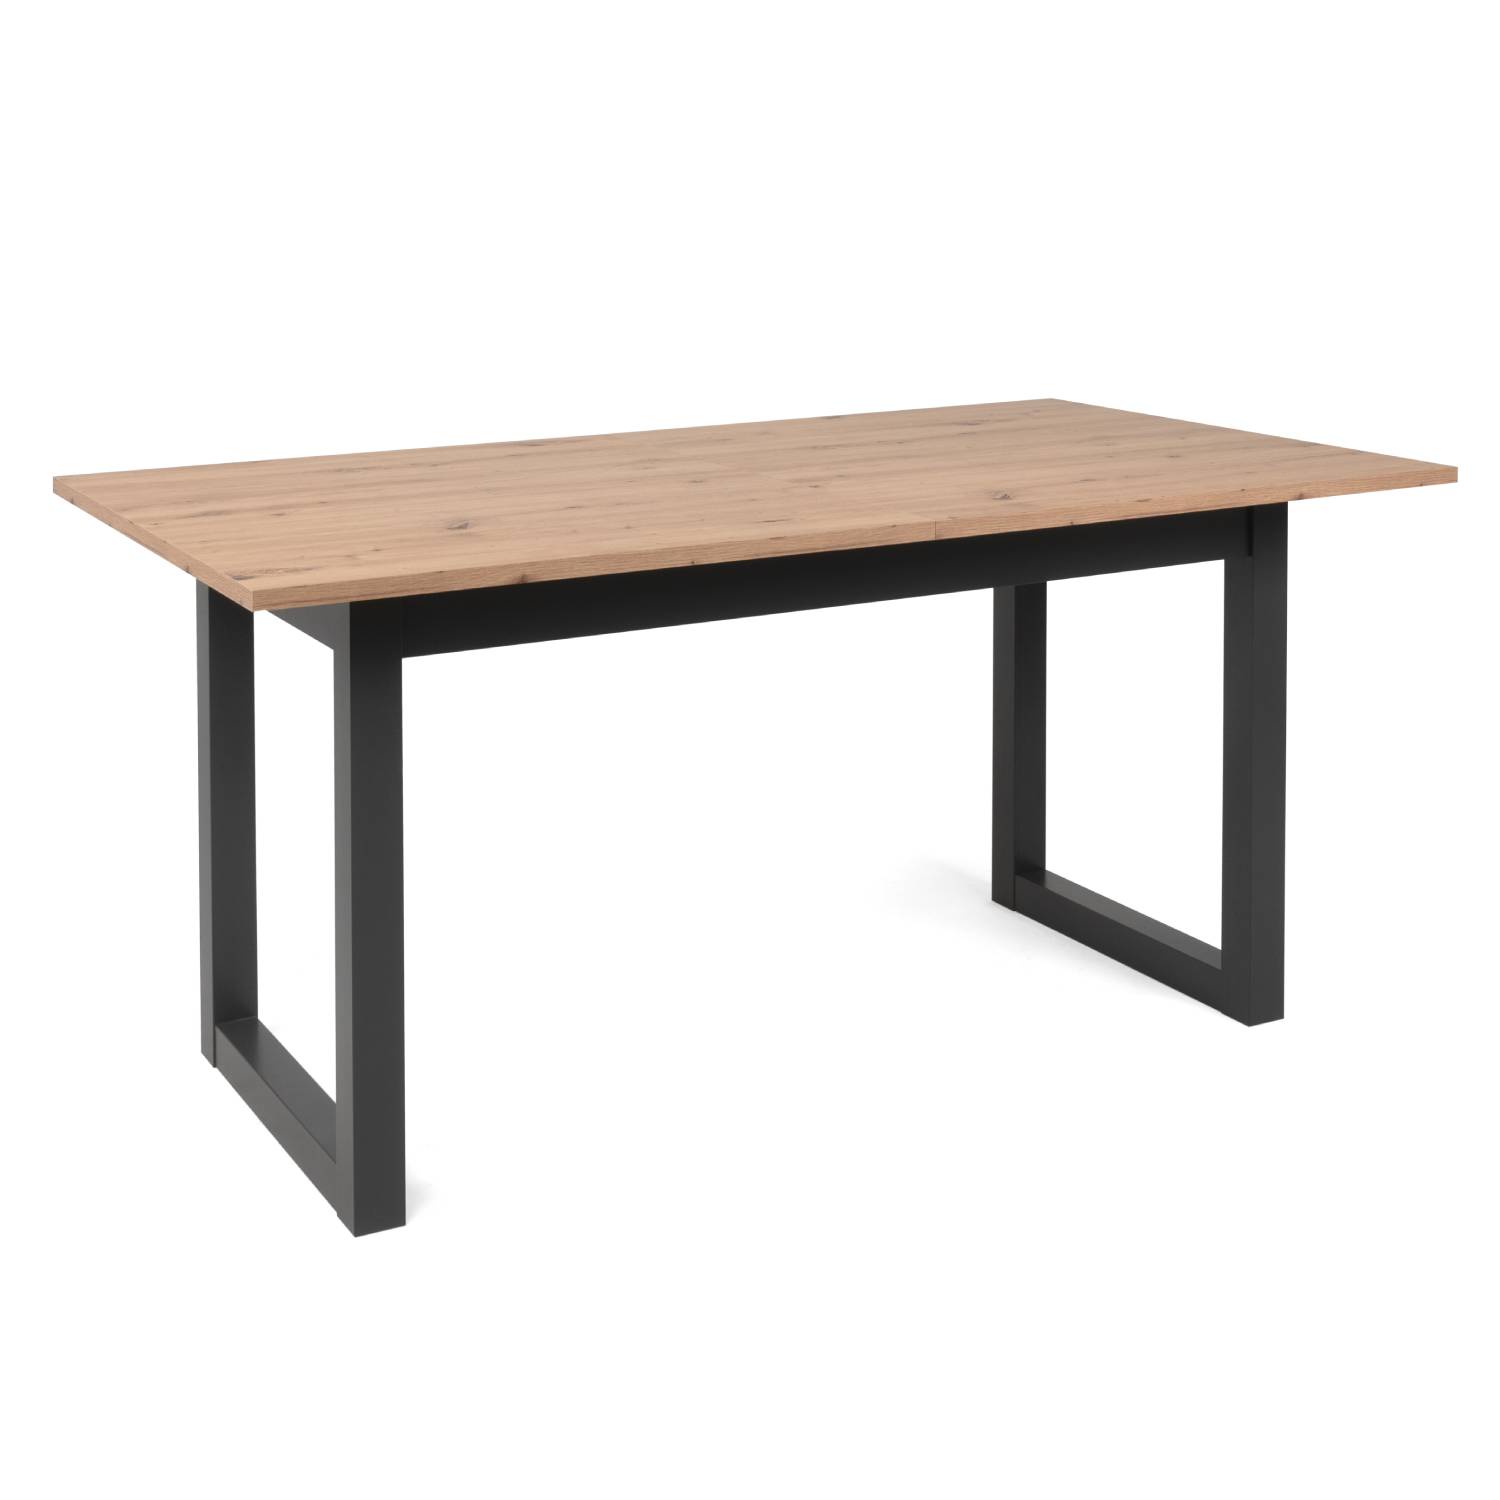 Dining Table Kitchen Table Wooden Table Expandable Table Industrial Style